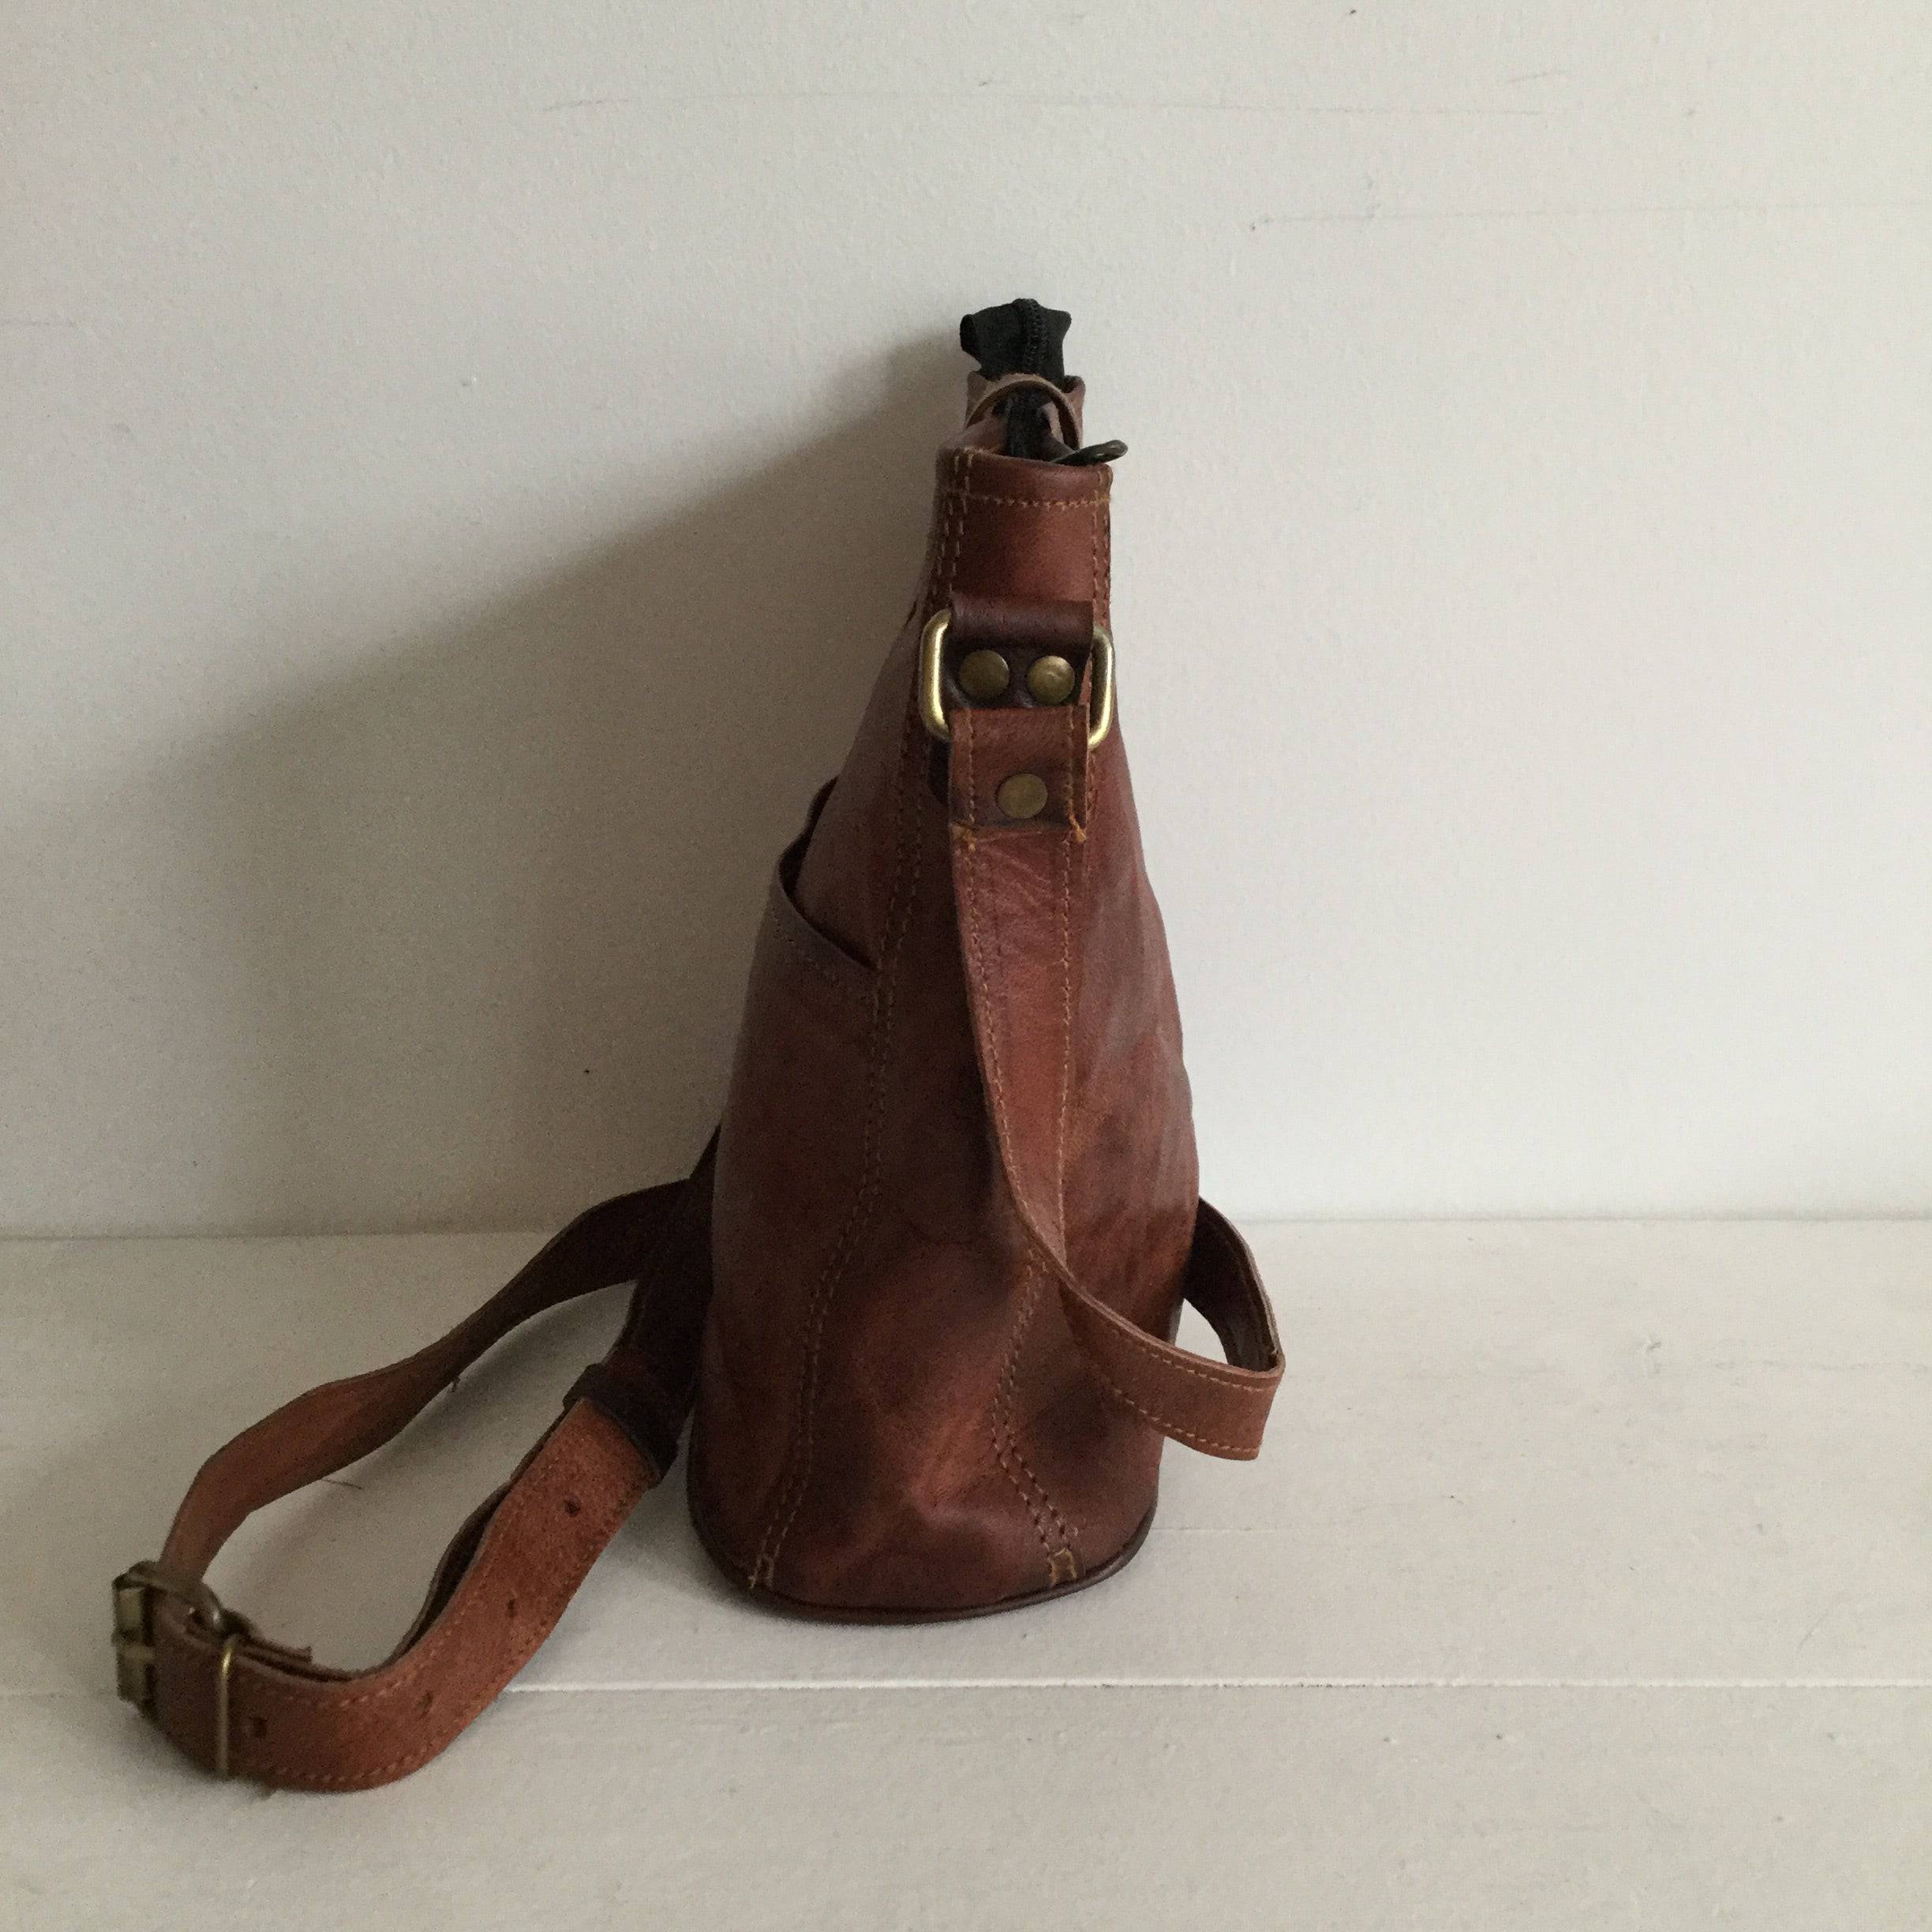 12" LEATHER BUCKET BAG - Out of the Blue